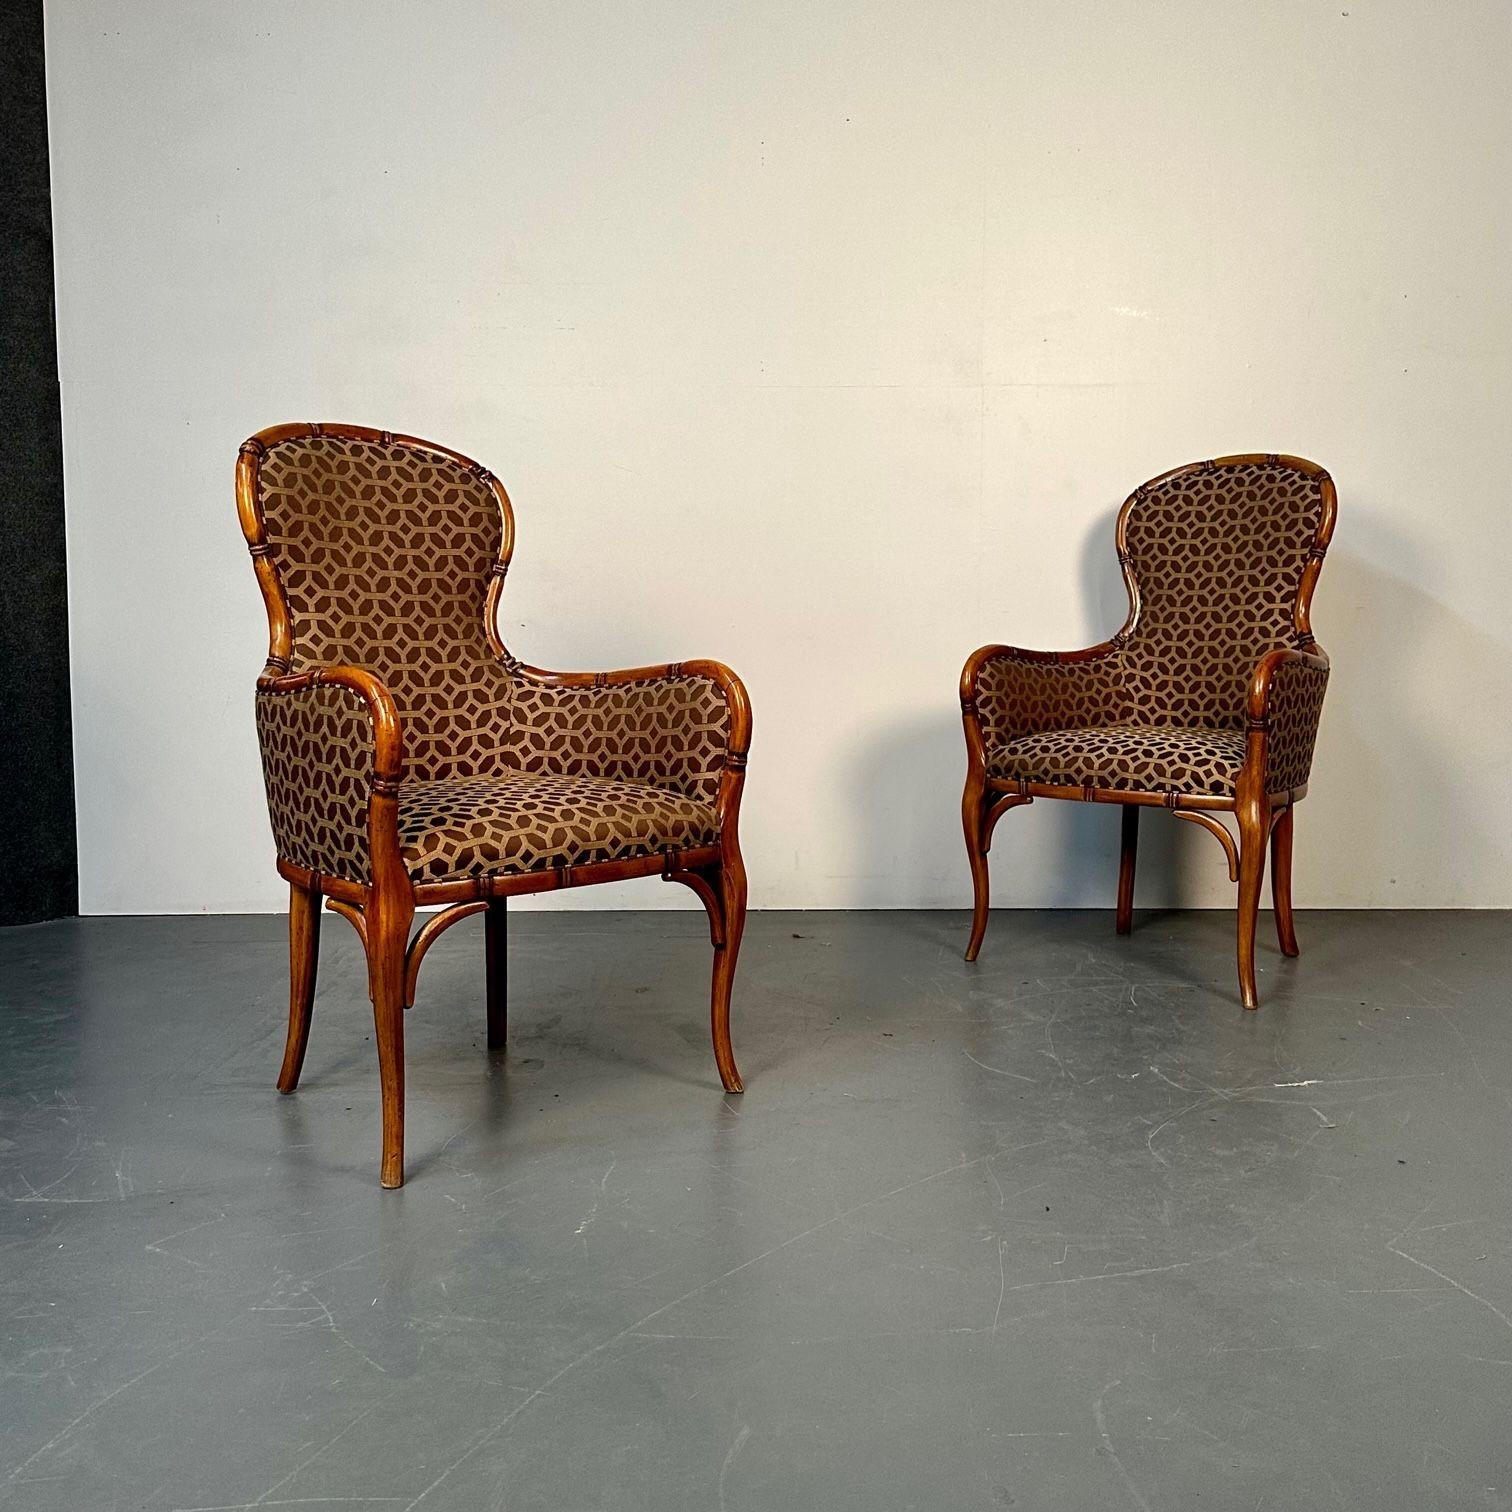 Pair of Fruitwood French Bamboo Carved Arm / Club / Accent Chairs, Kravet Fabric
 
Upholstered in Candice Olson Collection for Kravet fabric
 
Fruitwood, Kravet Fabric
France, 1960s
 
40H x 24W x 25D / SH 17
 
 
ISAX